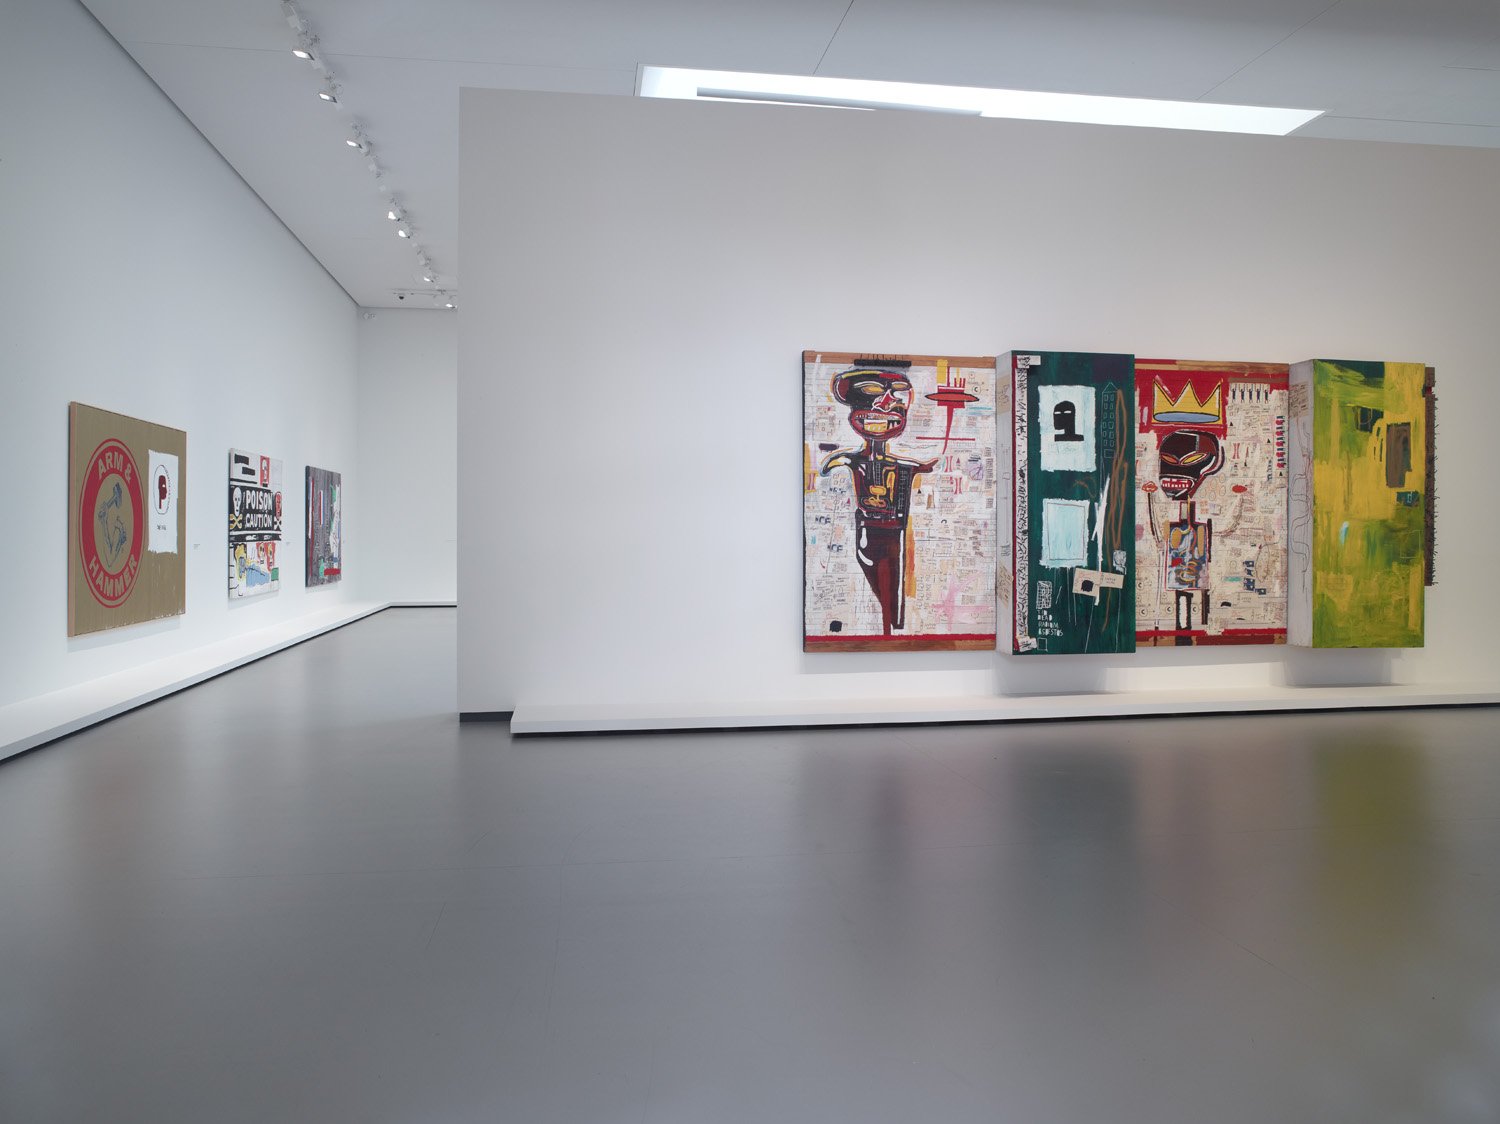 Installation view of the «Jean-Michel Basquiat » exhibition, gallery 9 (level 2), Fondation Louis Vuitton, Paris, from 3 October 2018 to 14 January 2019. © Estate of Jean-Michel